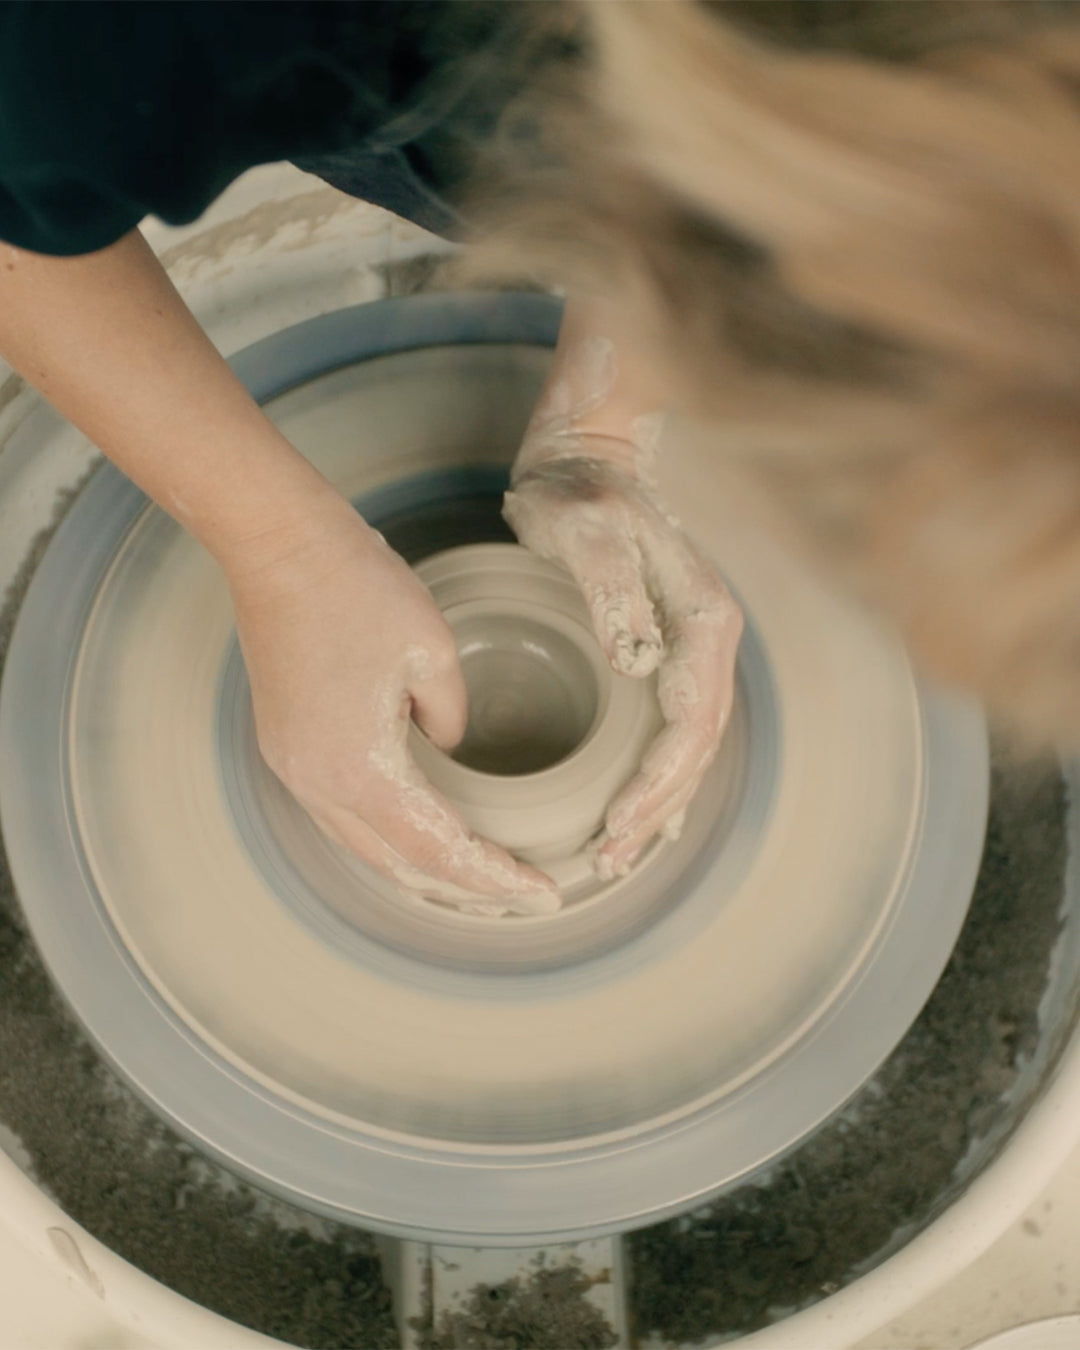 Andrea’s hands masterfully shaping a clay pot on a spinning wheel.